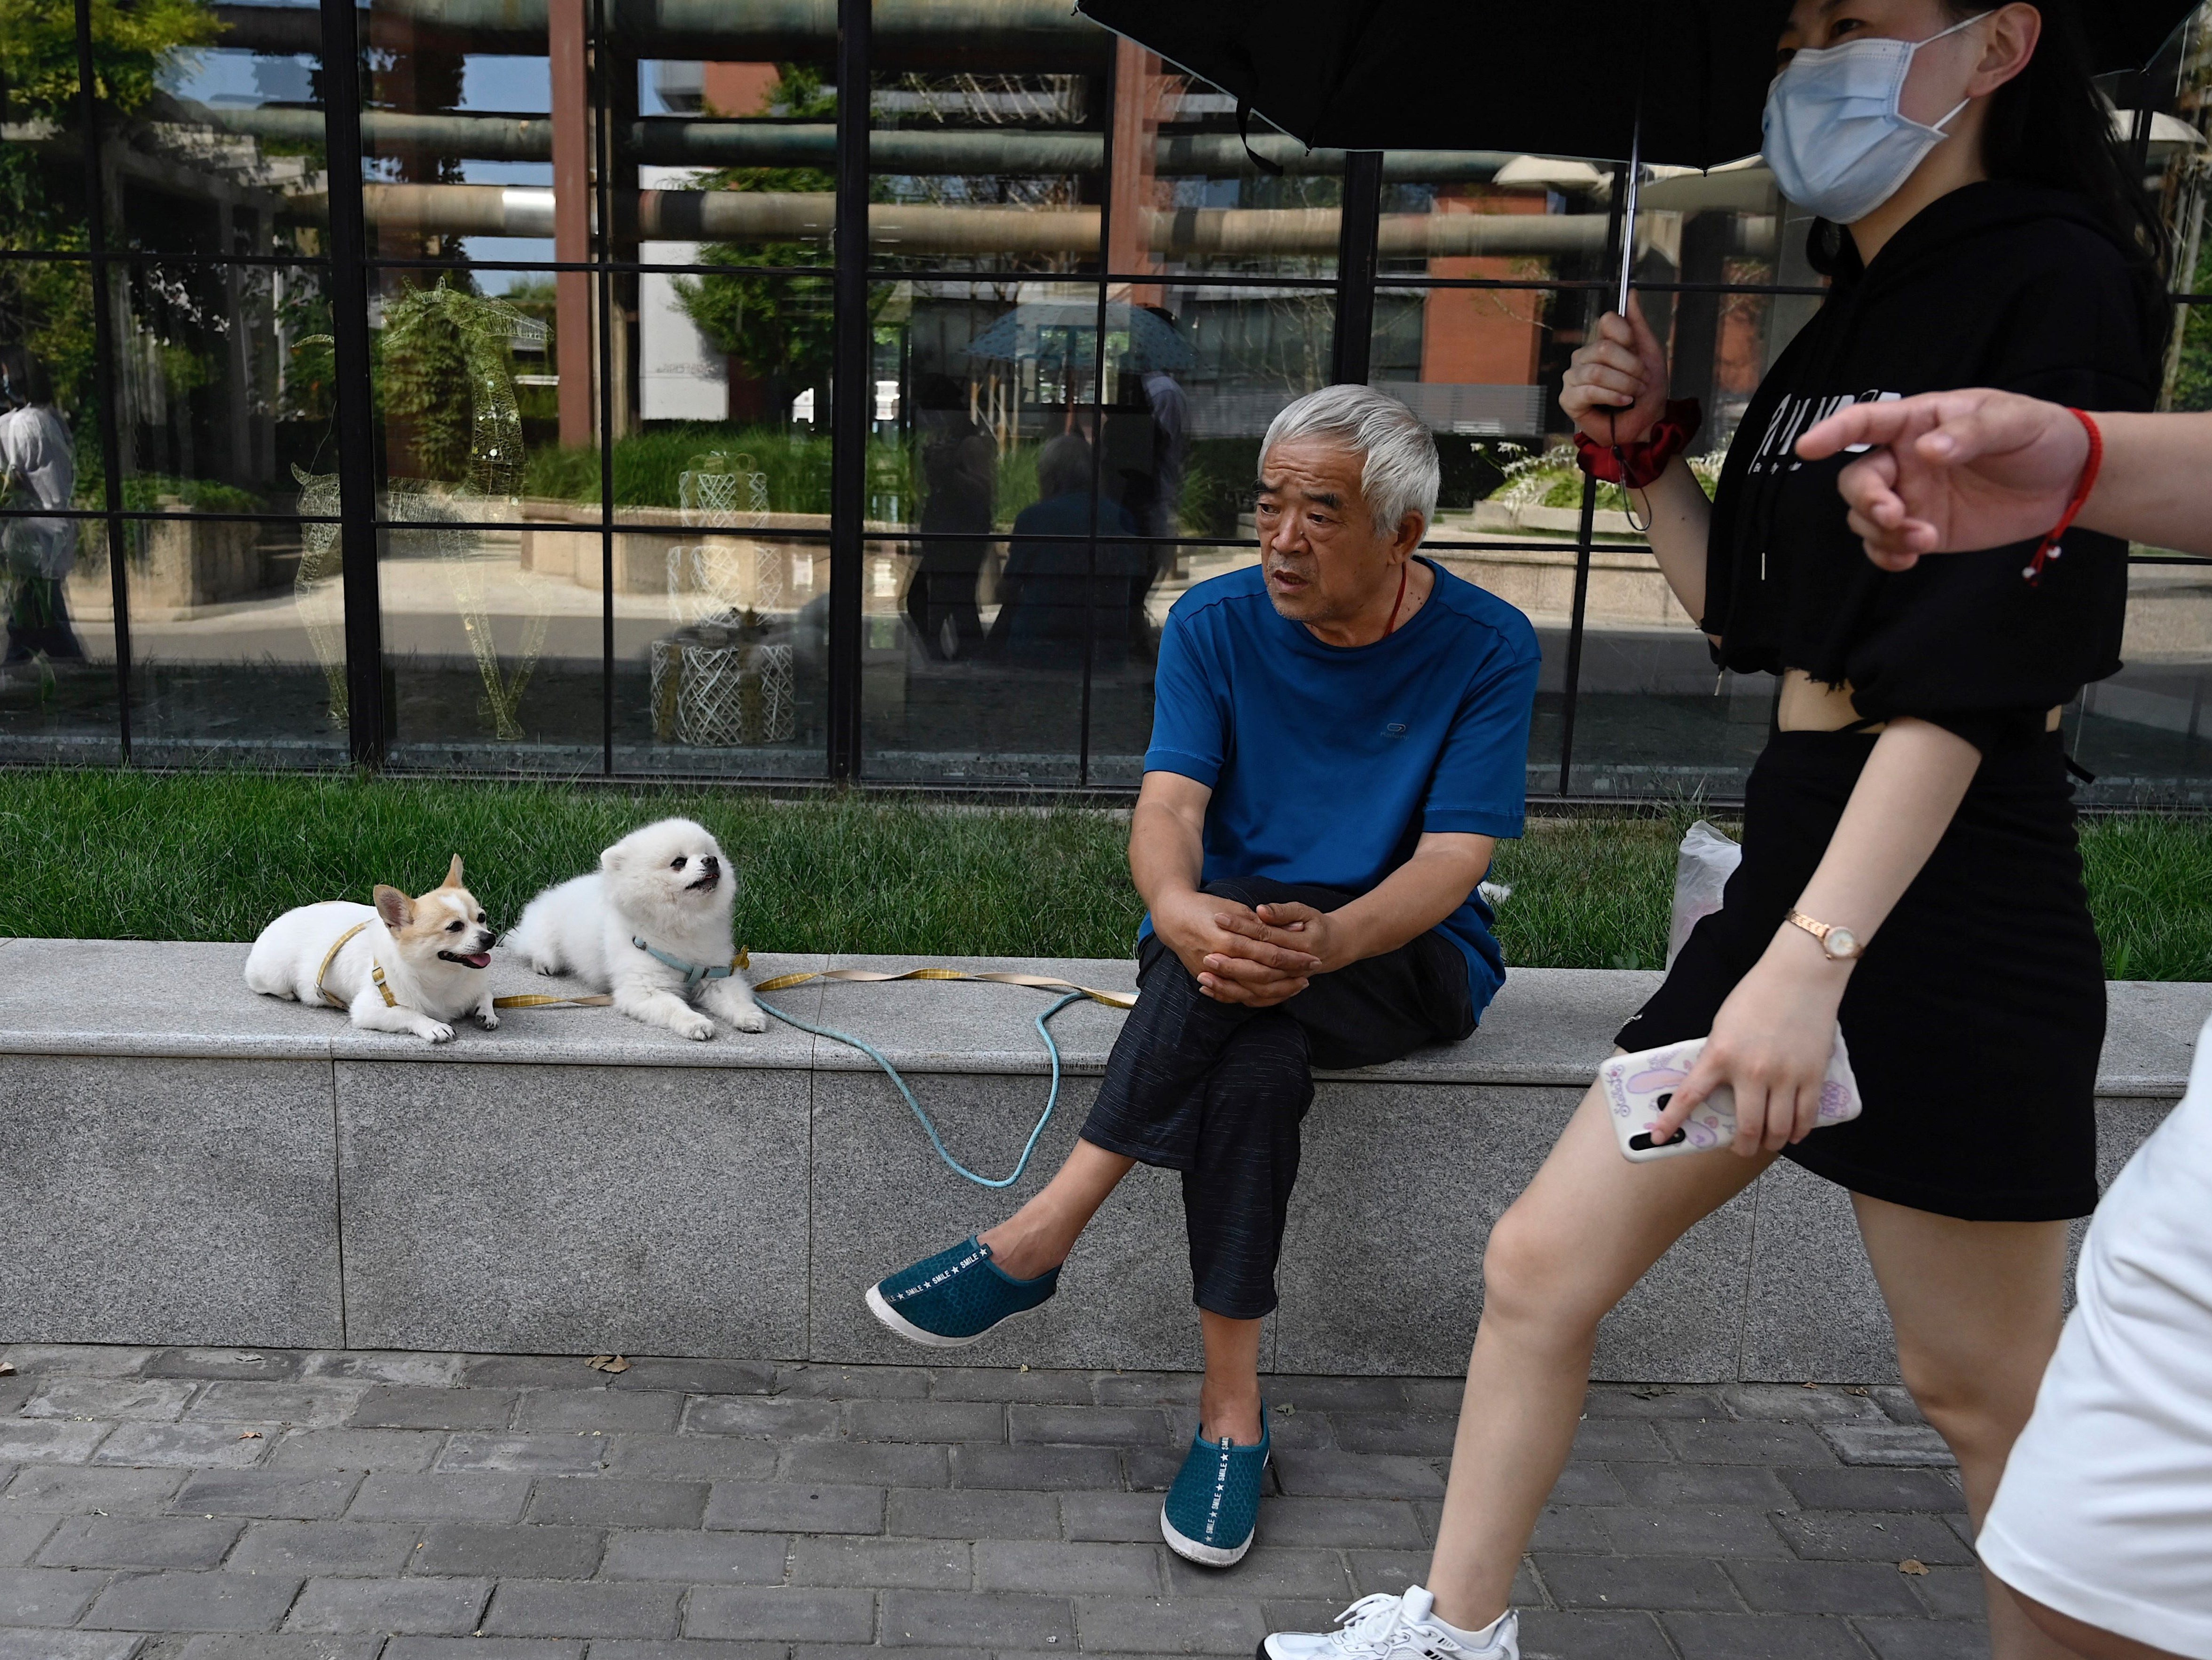 File: An elderly man sits on a bench with two pet dogs as a woman walks past at 798 art district in Beijing on 21 August 2021